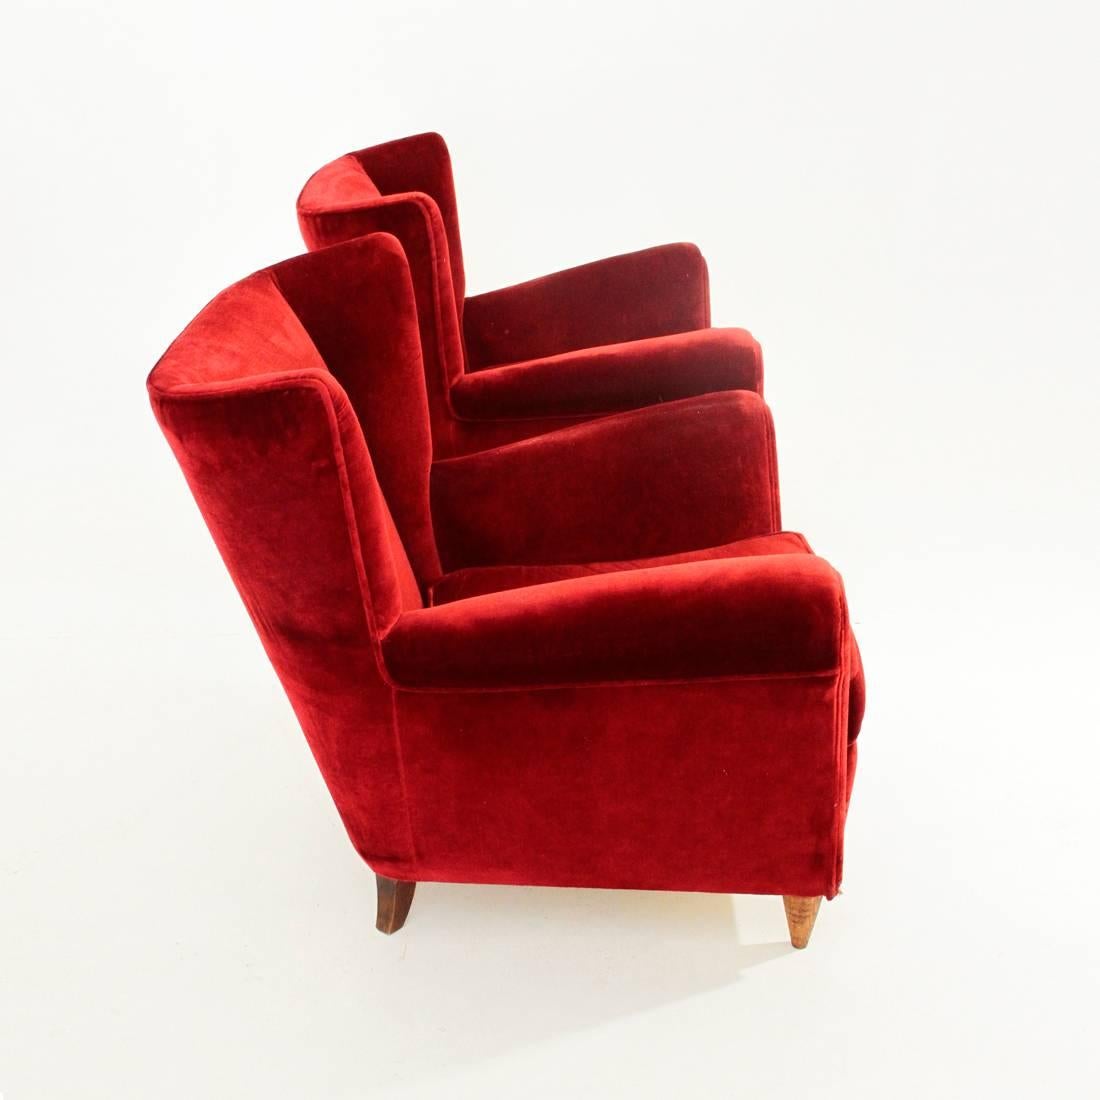 Two Italian armchairs of the 1950s.
Upholstered wooden structure lined with red velvet, original of the era.
Sitting with pillow.
Legs in conical shape wood.
Good general condition of the structure. An armchair has a small tear visible in the